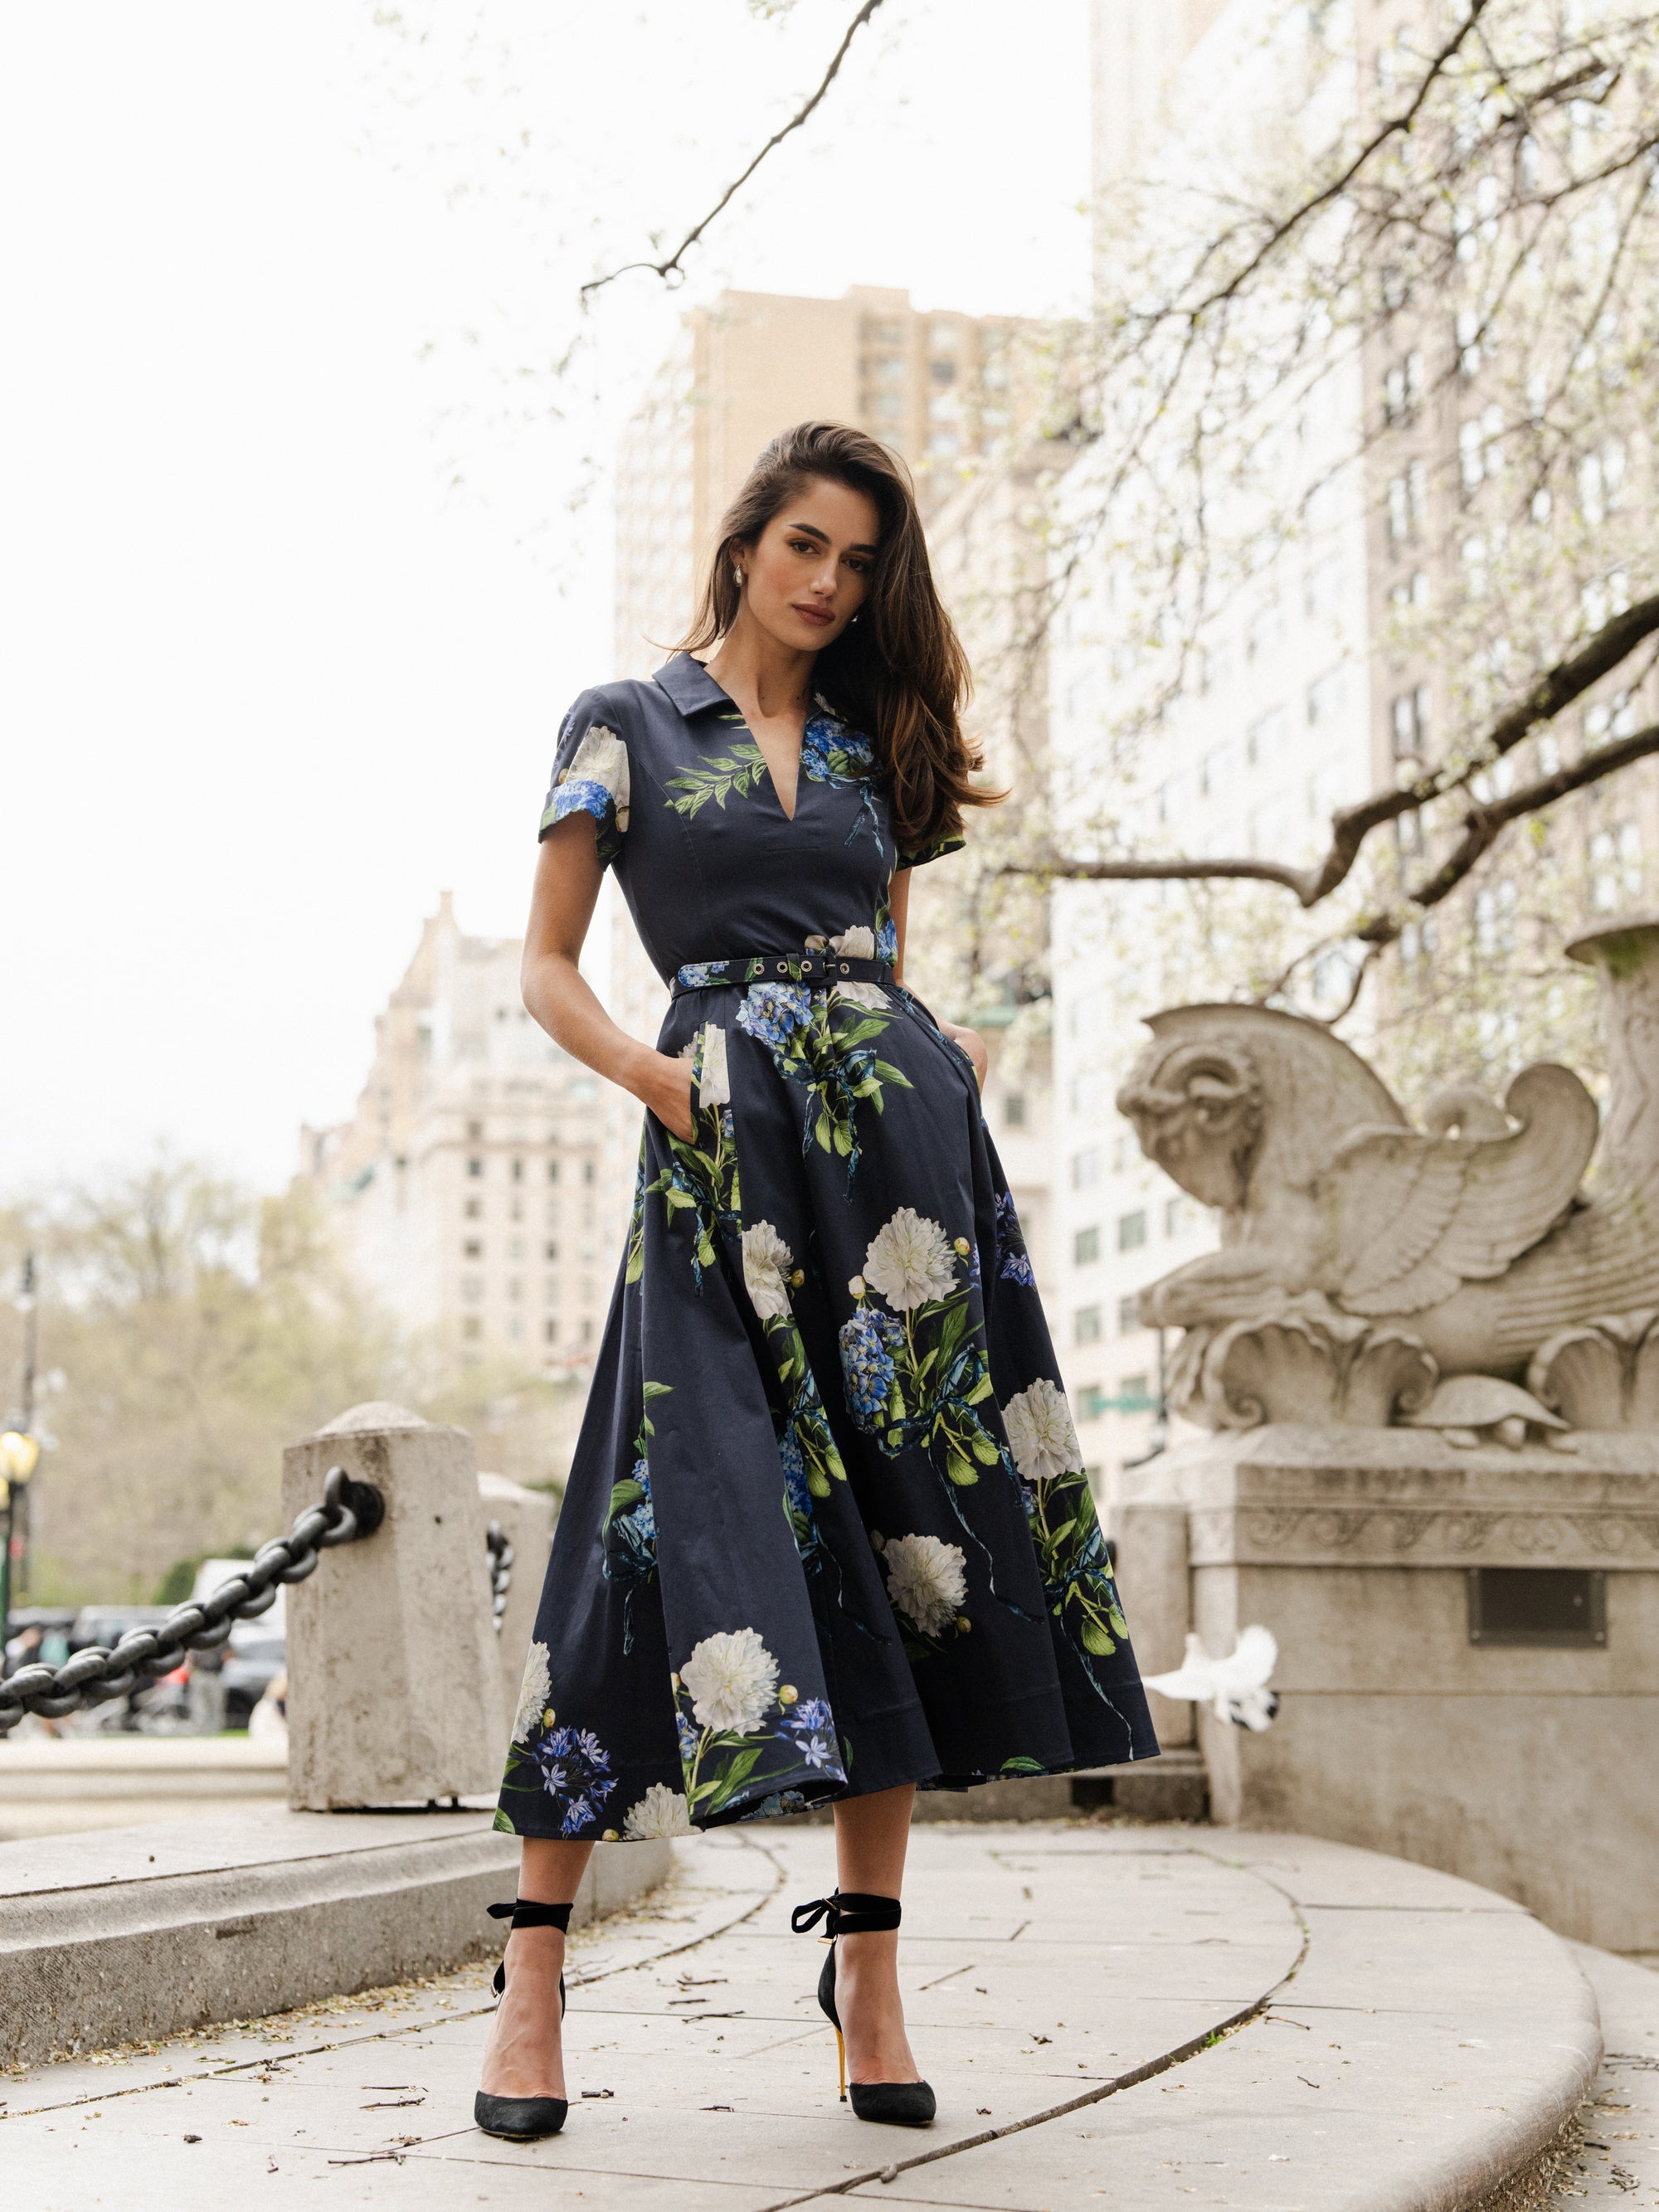 Monique Lhuillier Fall 2024 night sky floral collared, short sleeve dress with pockets, belted waist and midi a-line skirt - look book photo.